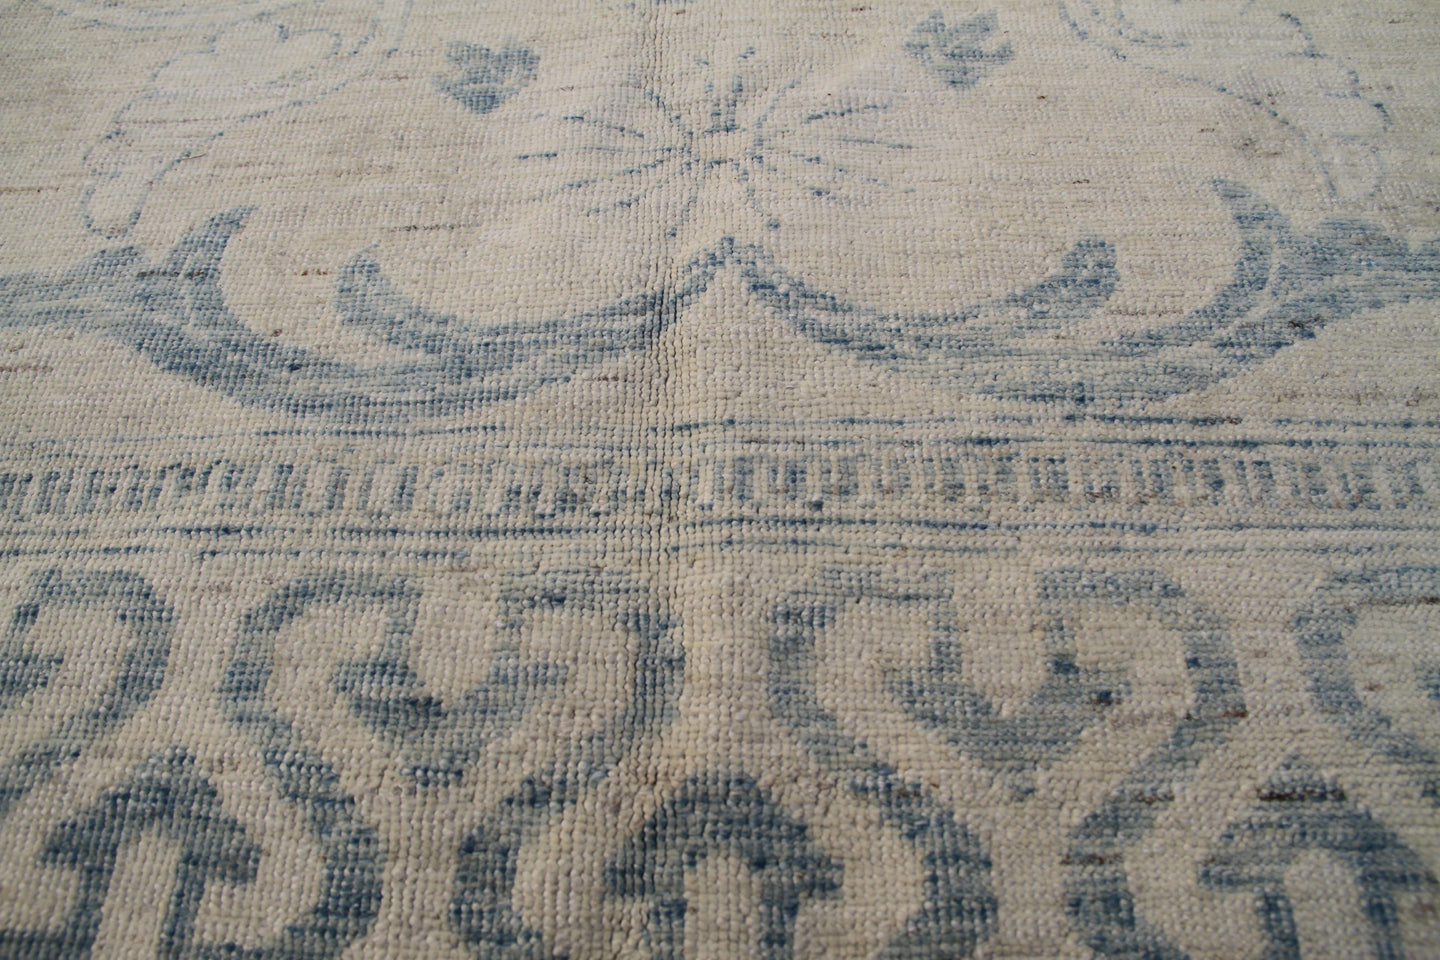 9.03 x  6.10 Blue and Cream Hand-knotted Japanese Design Ariana Transitional Wool Rug